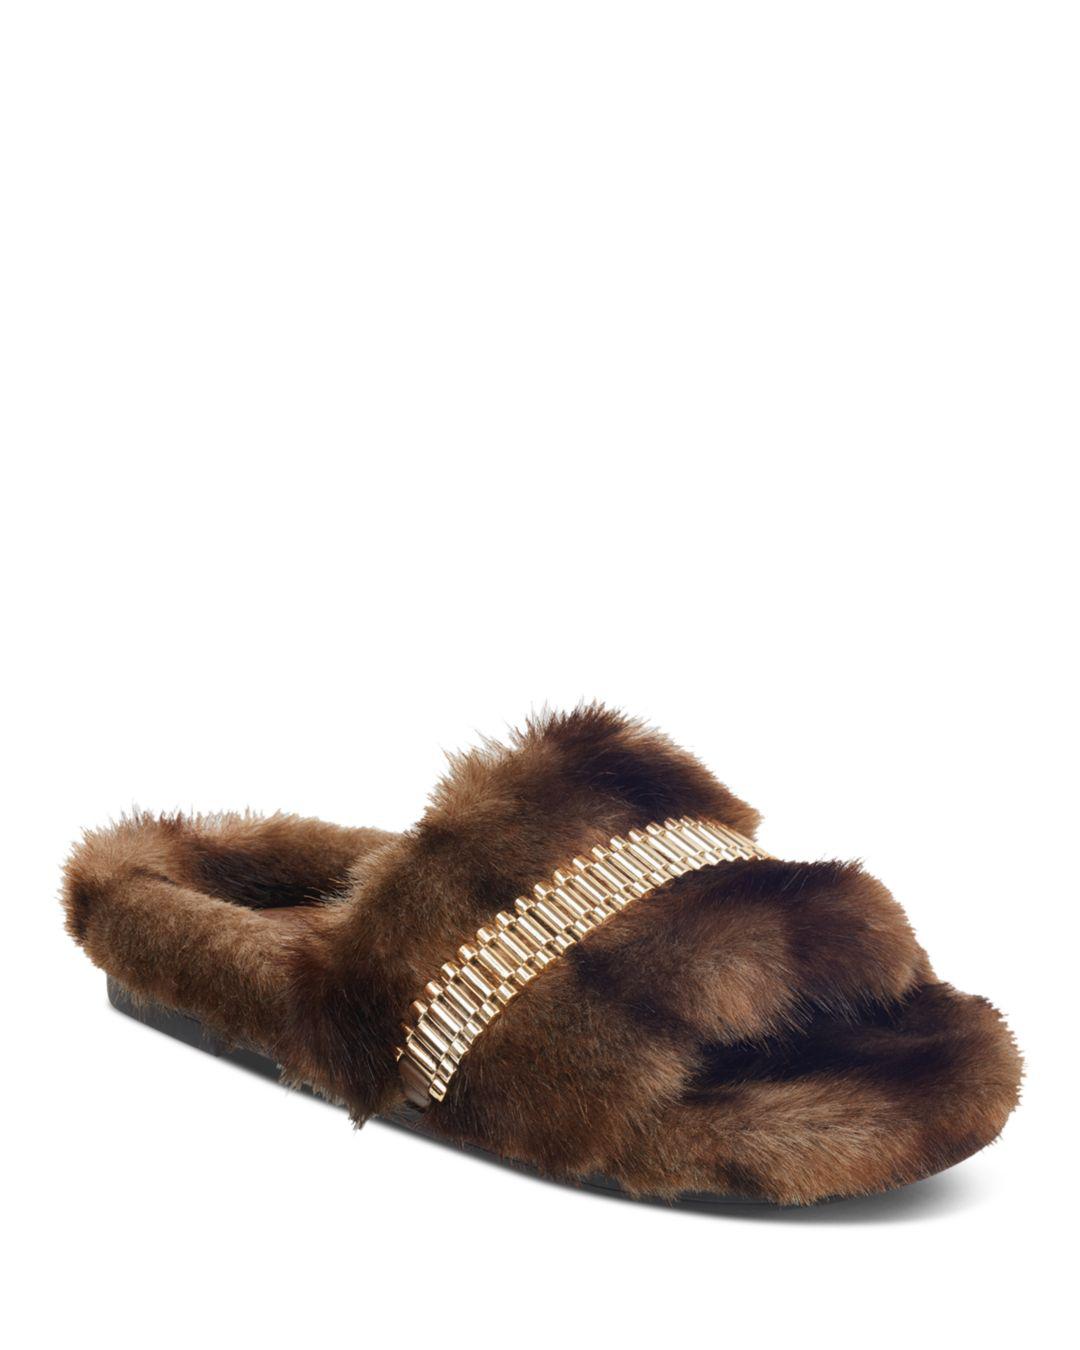 Kendall + Kylie Shade Faux Fur Slippers in Brown - Lyst